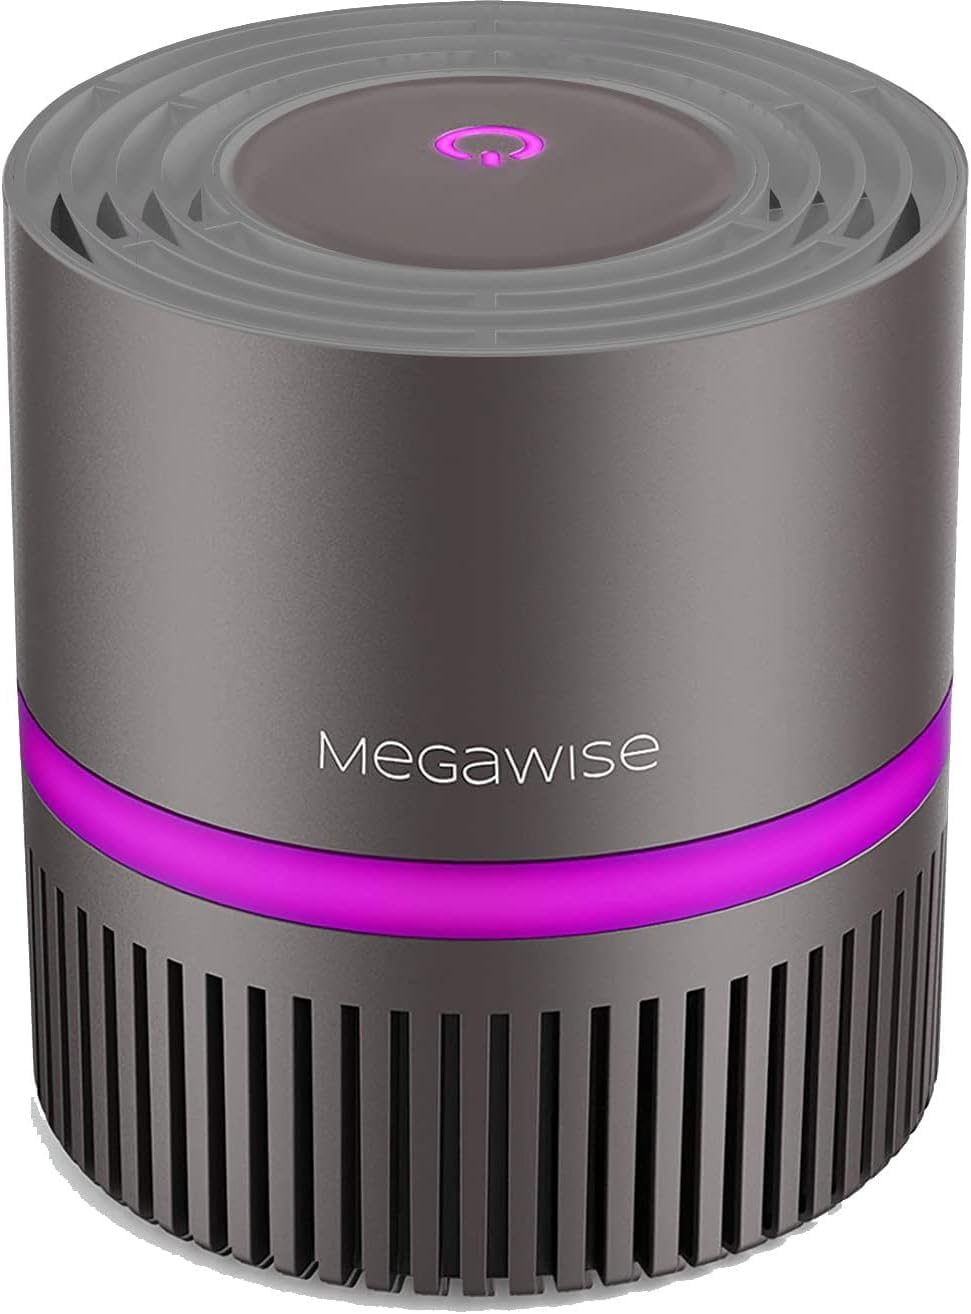 MEGAWISE H13 True HEPA Air Purifier Cleaner for Home Bedroom Small Room Office, help to purify for Smoke, Dust, Pet Dander, Ozone Free, Fully Certified